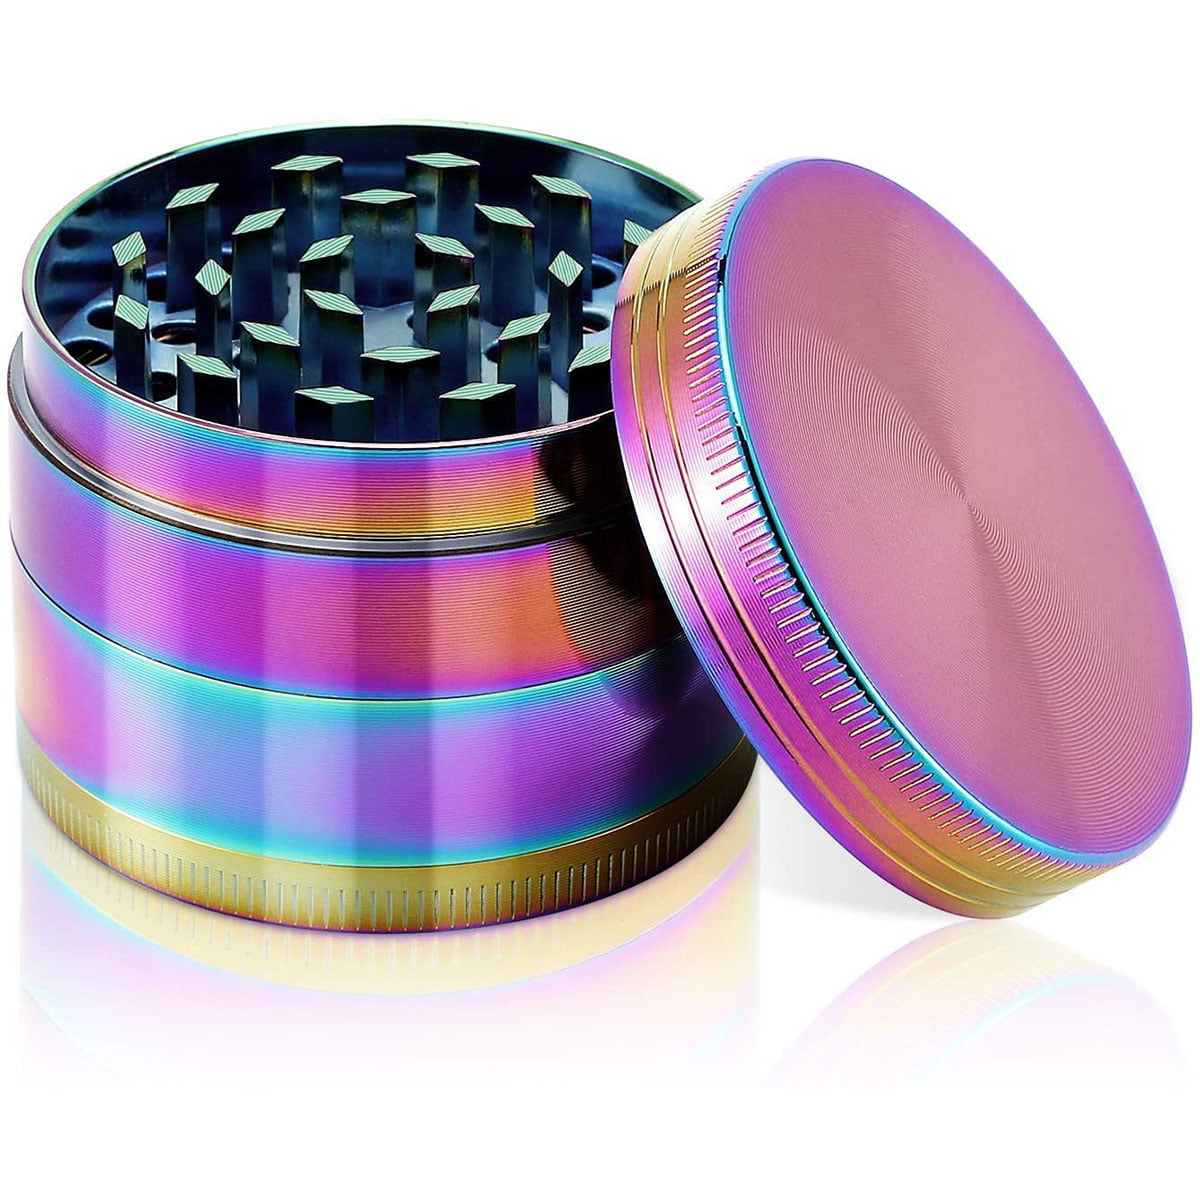 DCOU New Design rainbow herb Grinder 2.2 Inches 4 Piece Tobacco Grinder with Pollen Catcher Durable Zinc Alloy Heavy Duty Spice Grinder with Easy Access Window 